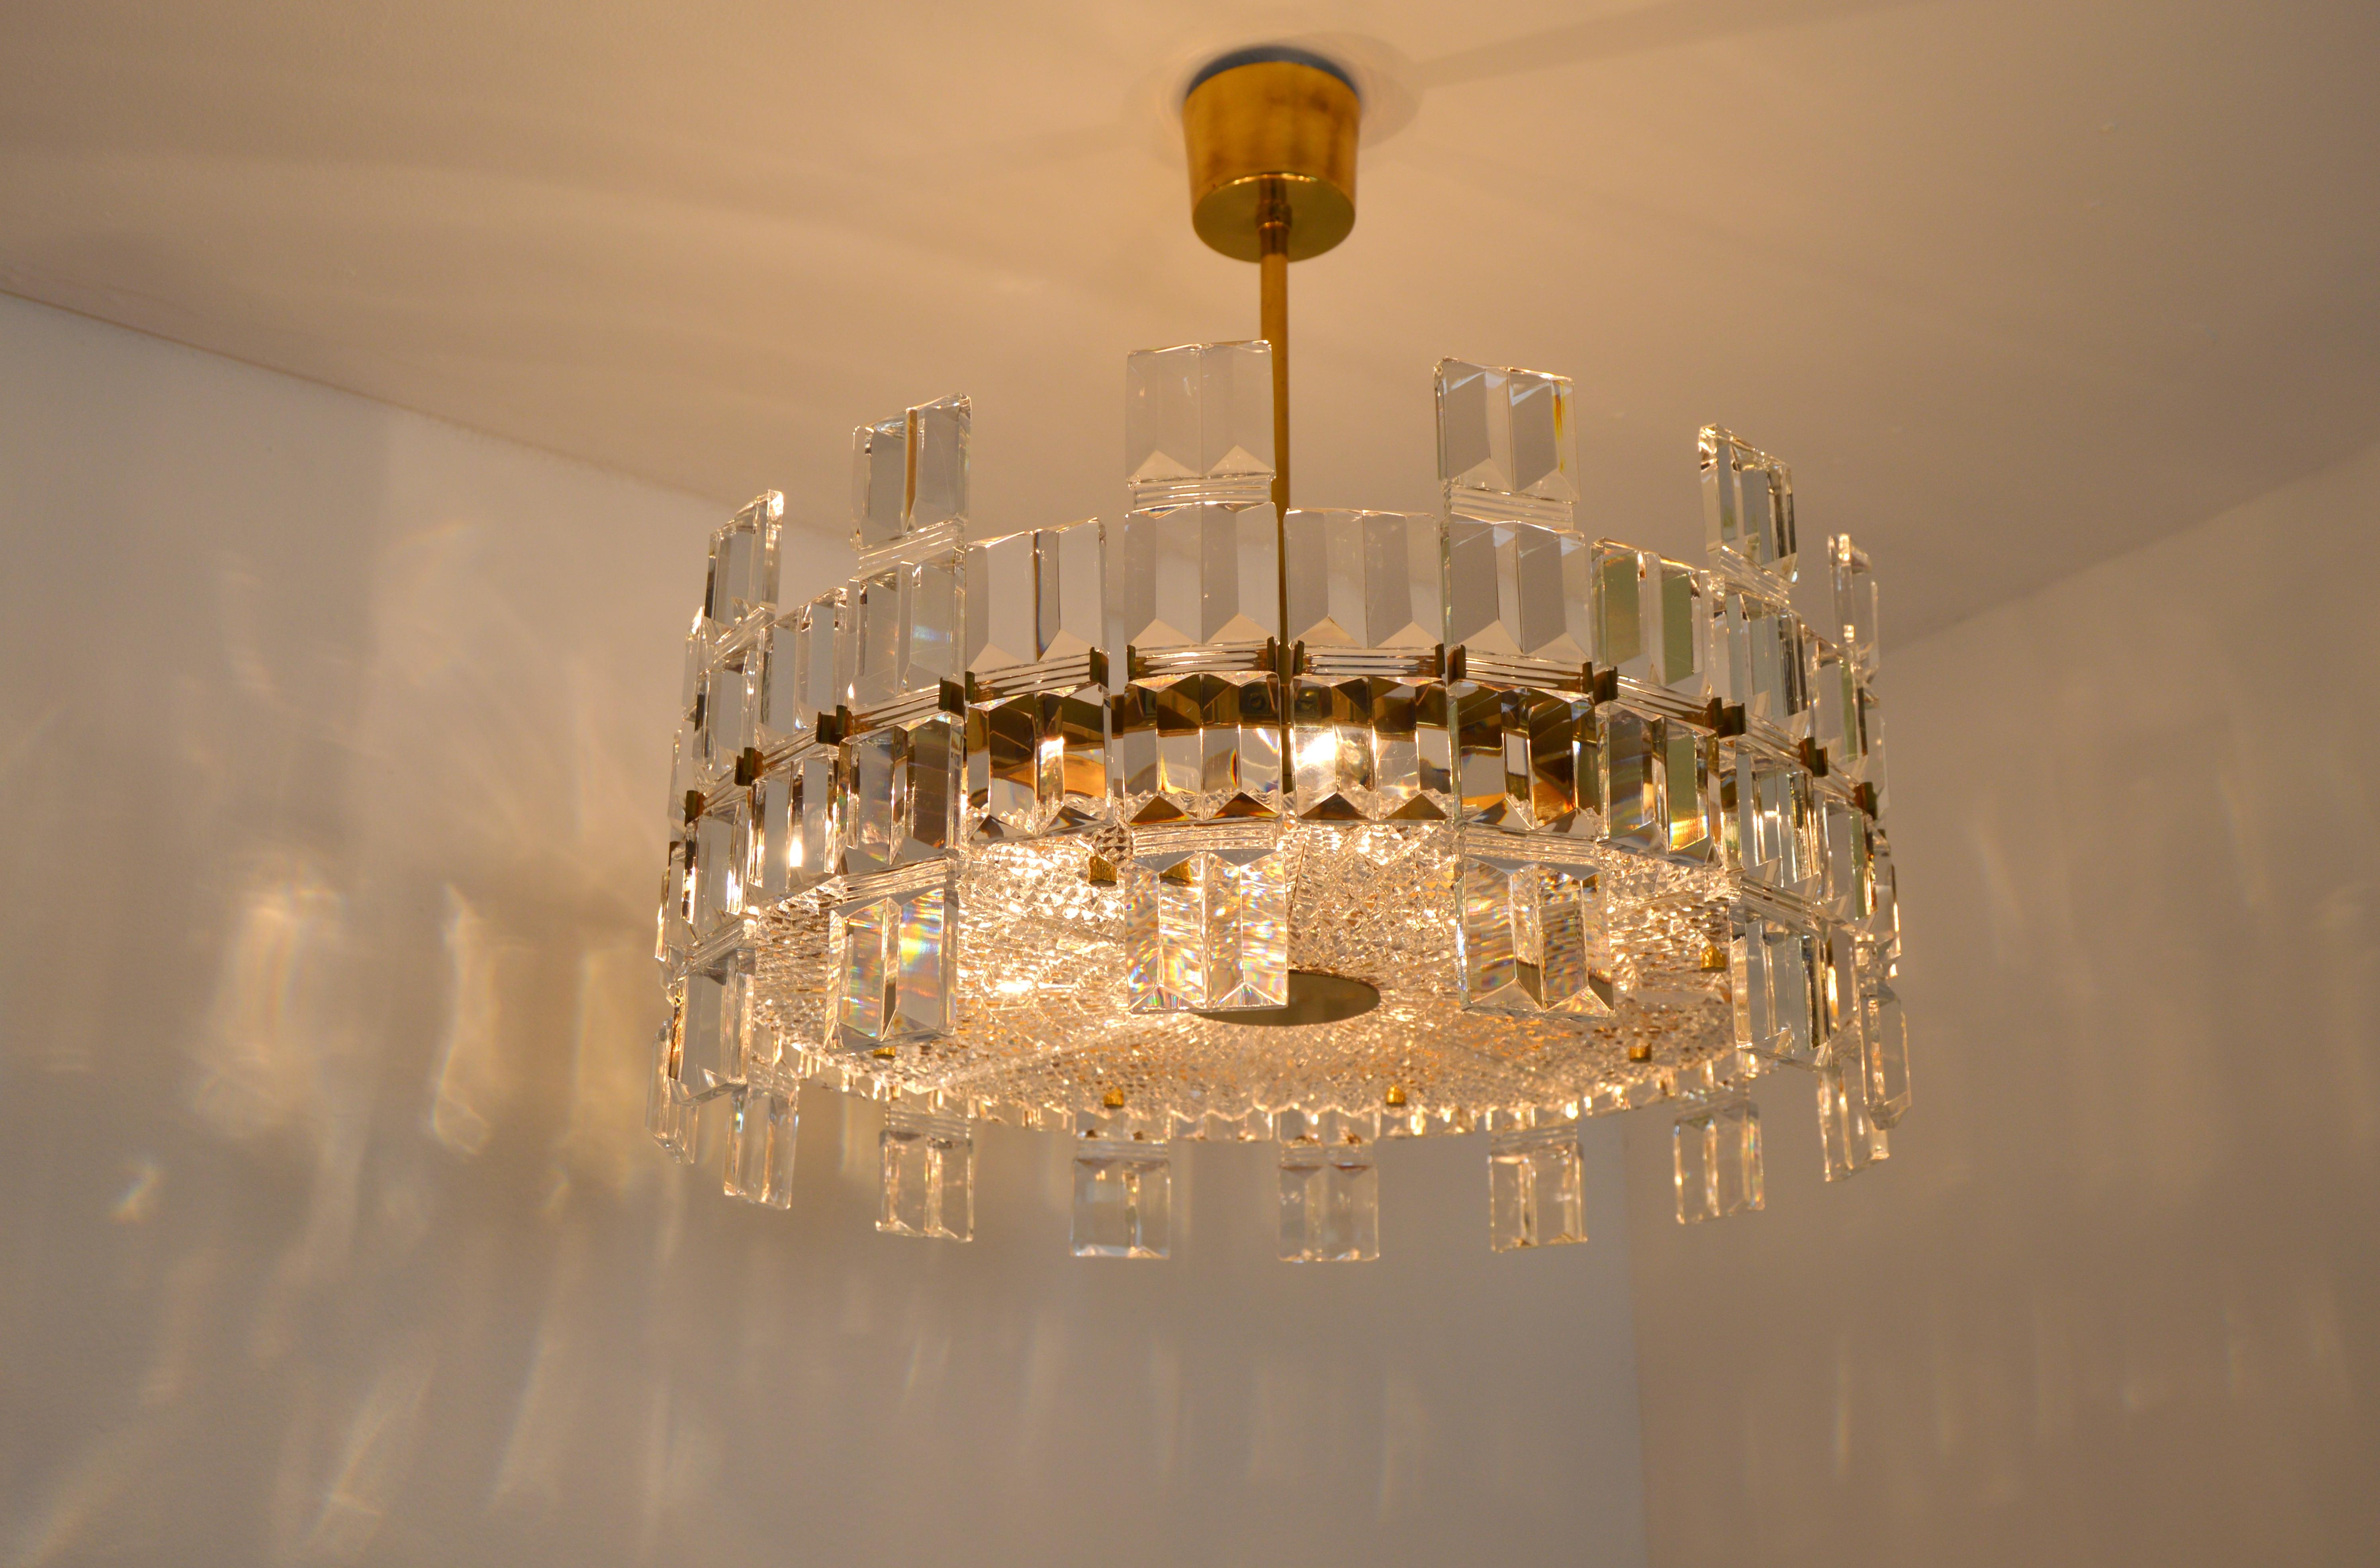 A rarley seen luxurious chandelier designed by Carl Fagerlund for Orrefors, Sweden.
Crystal glass and brass. It consists of 14 large and 14 smaller glass units that surround a round metal frame. Each glass unit is clamped between four brackets. A